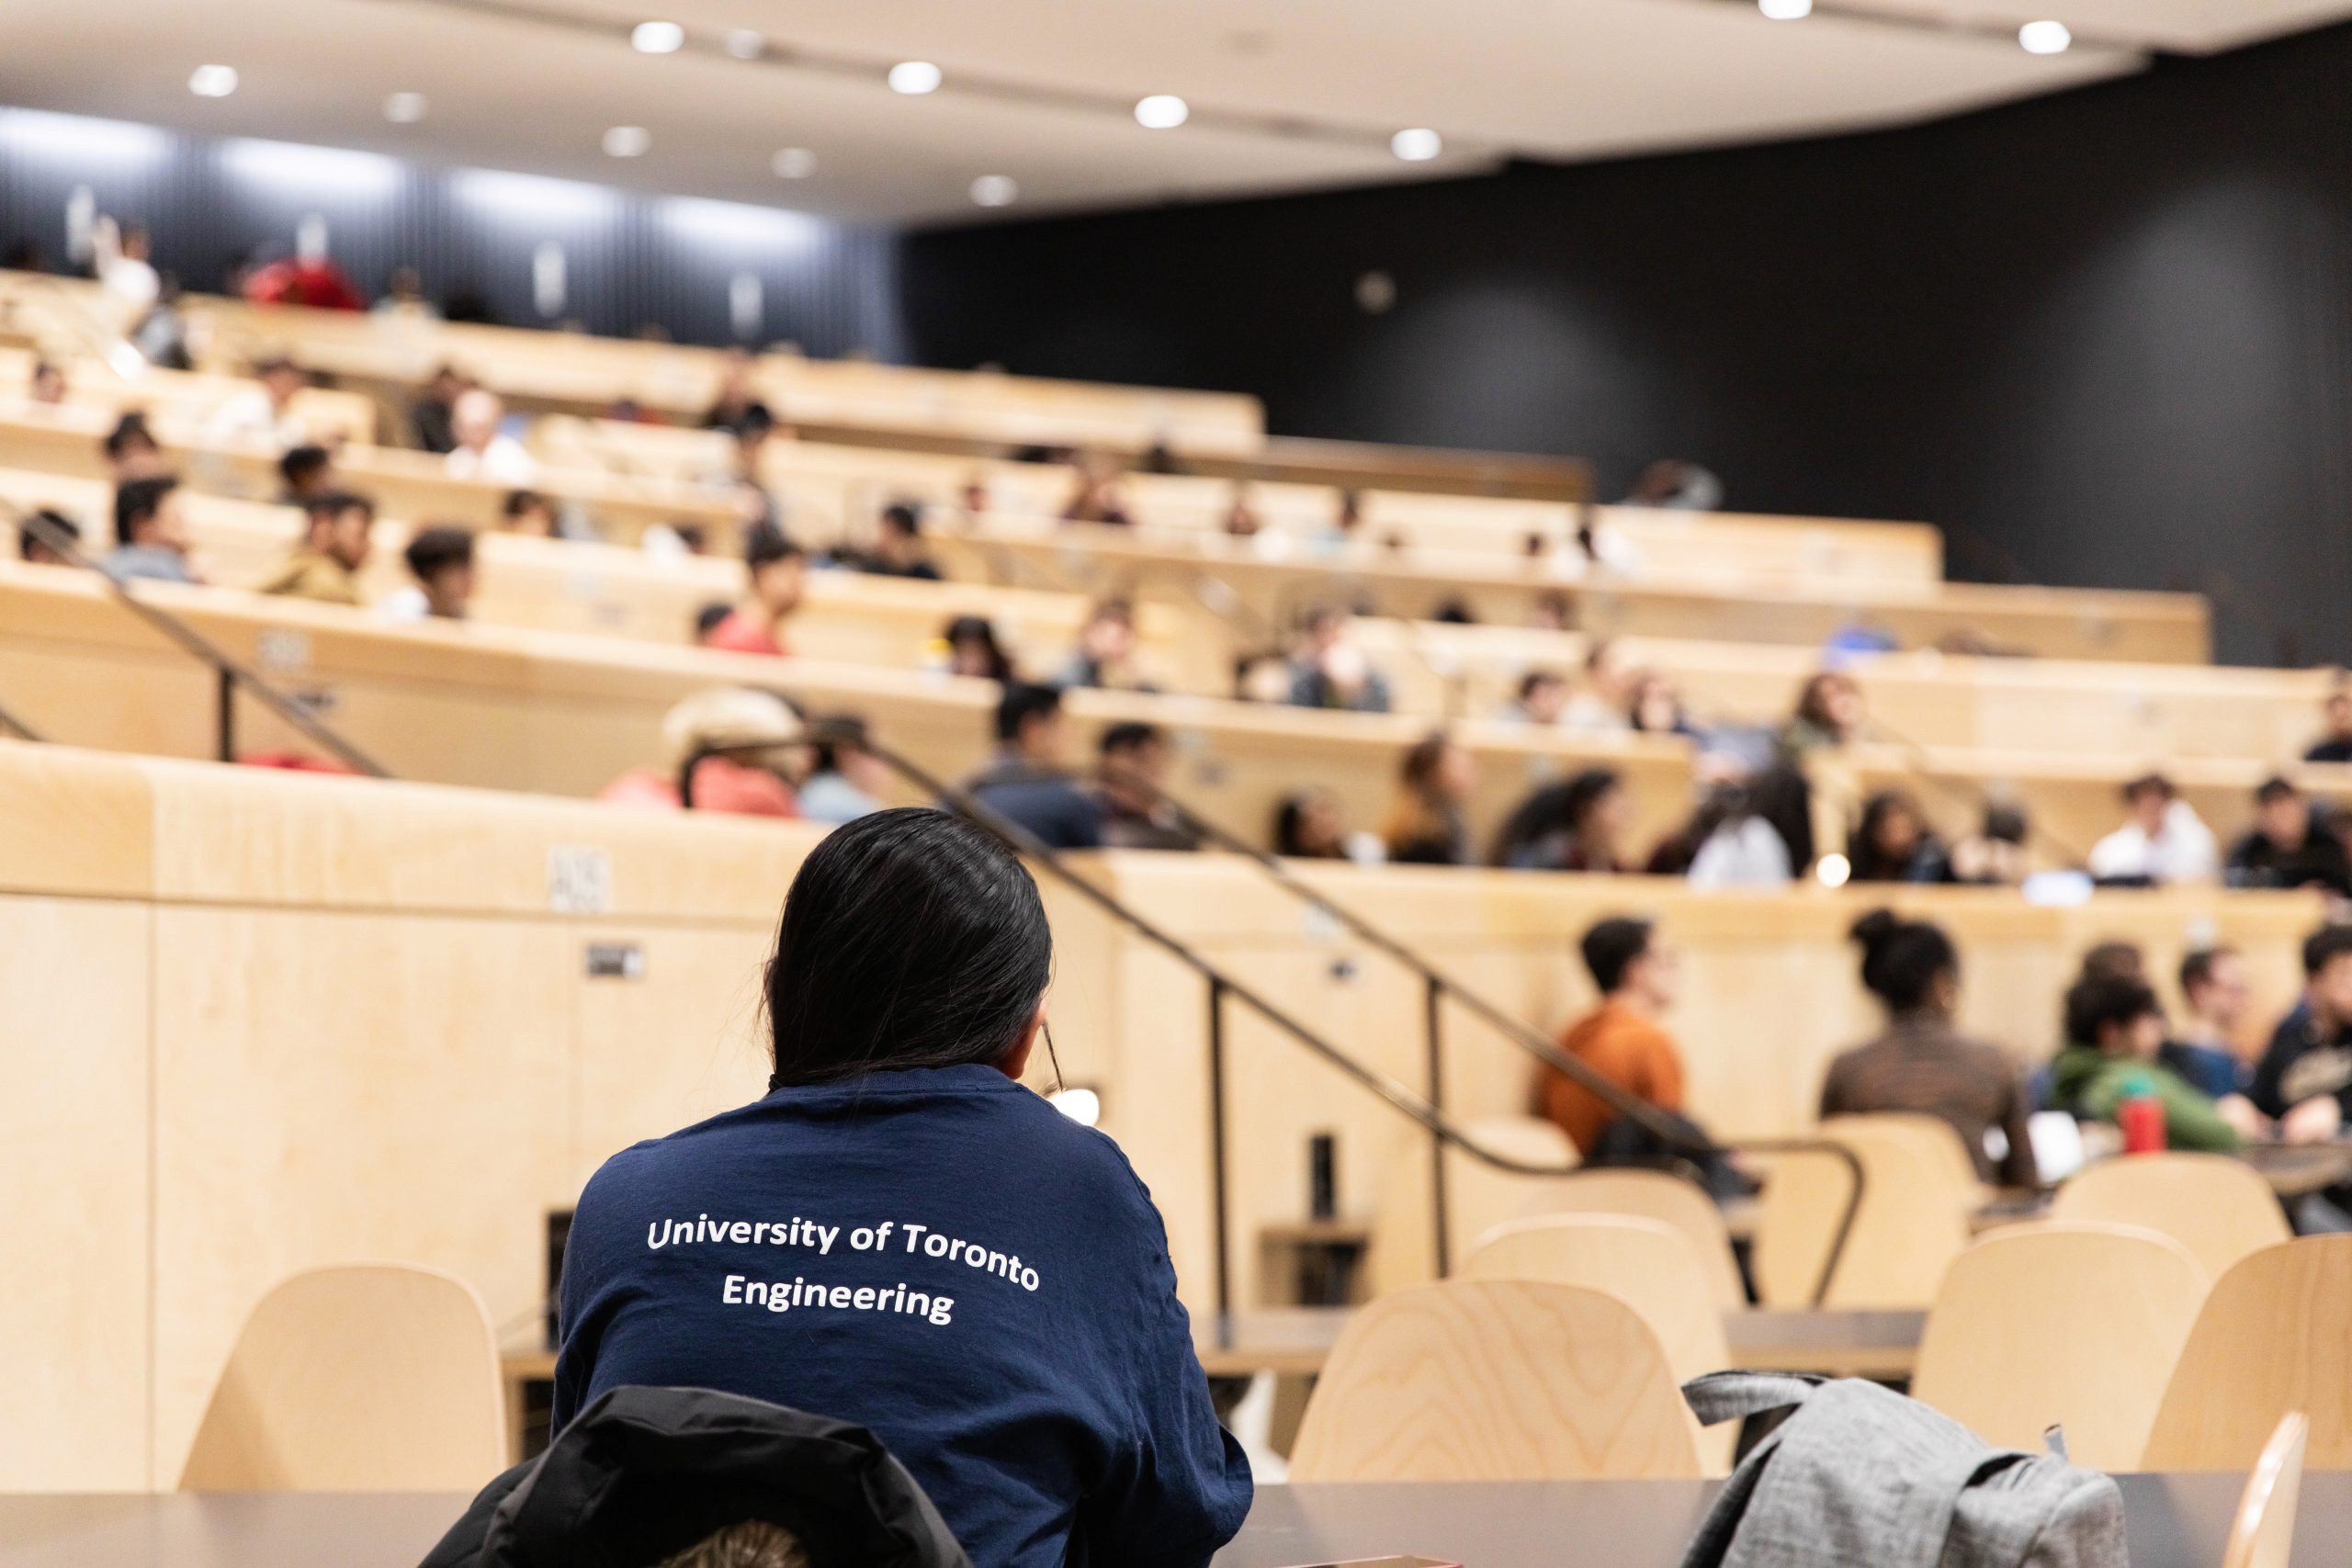 Photo shows a lecture hall full of students. It highlights a student wearing a U of T Engineering t-shirt.